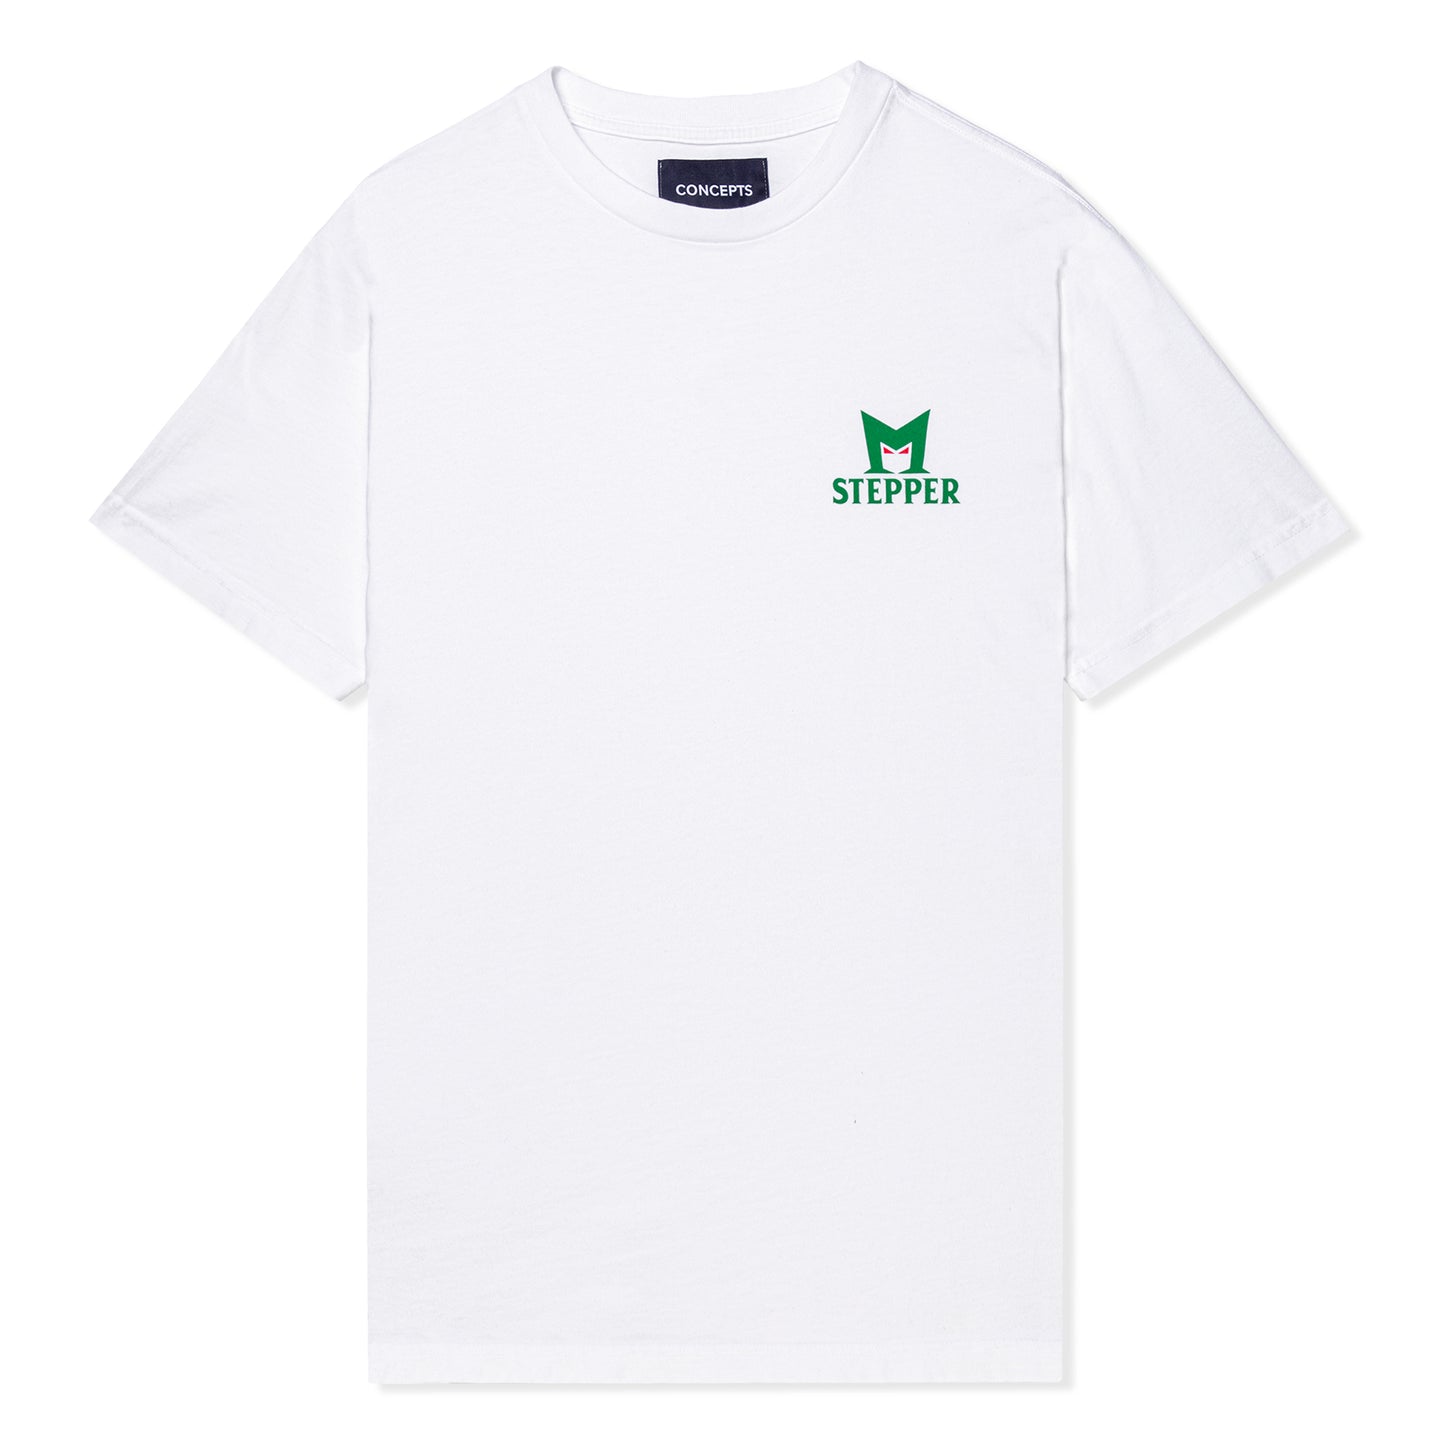 Concepts x Mephisto Stepper Tee (White)